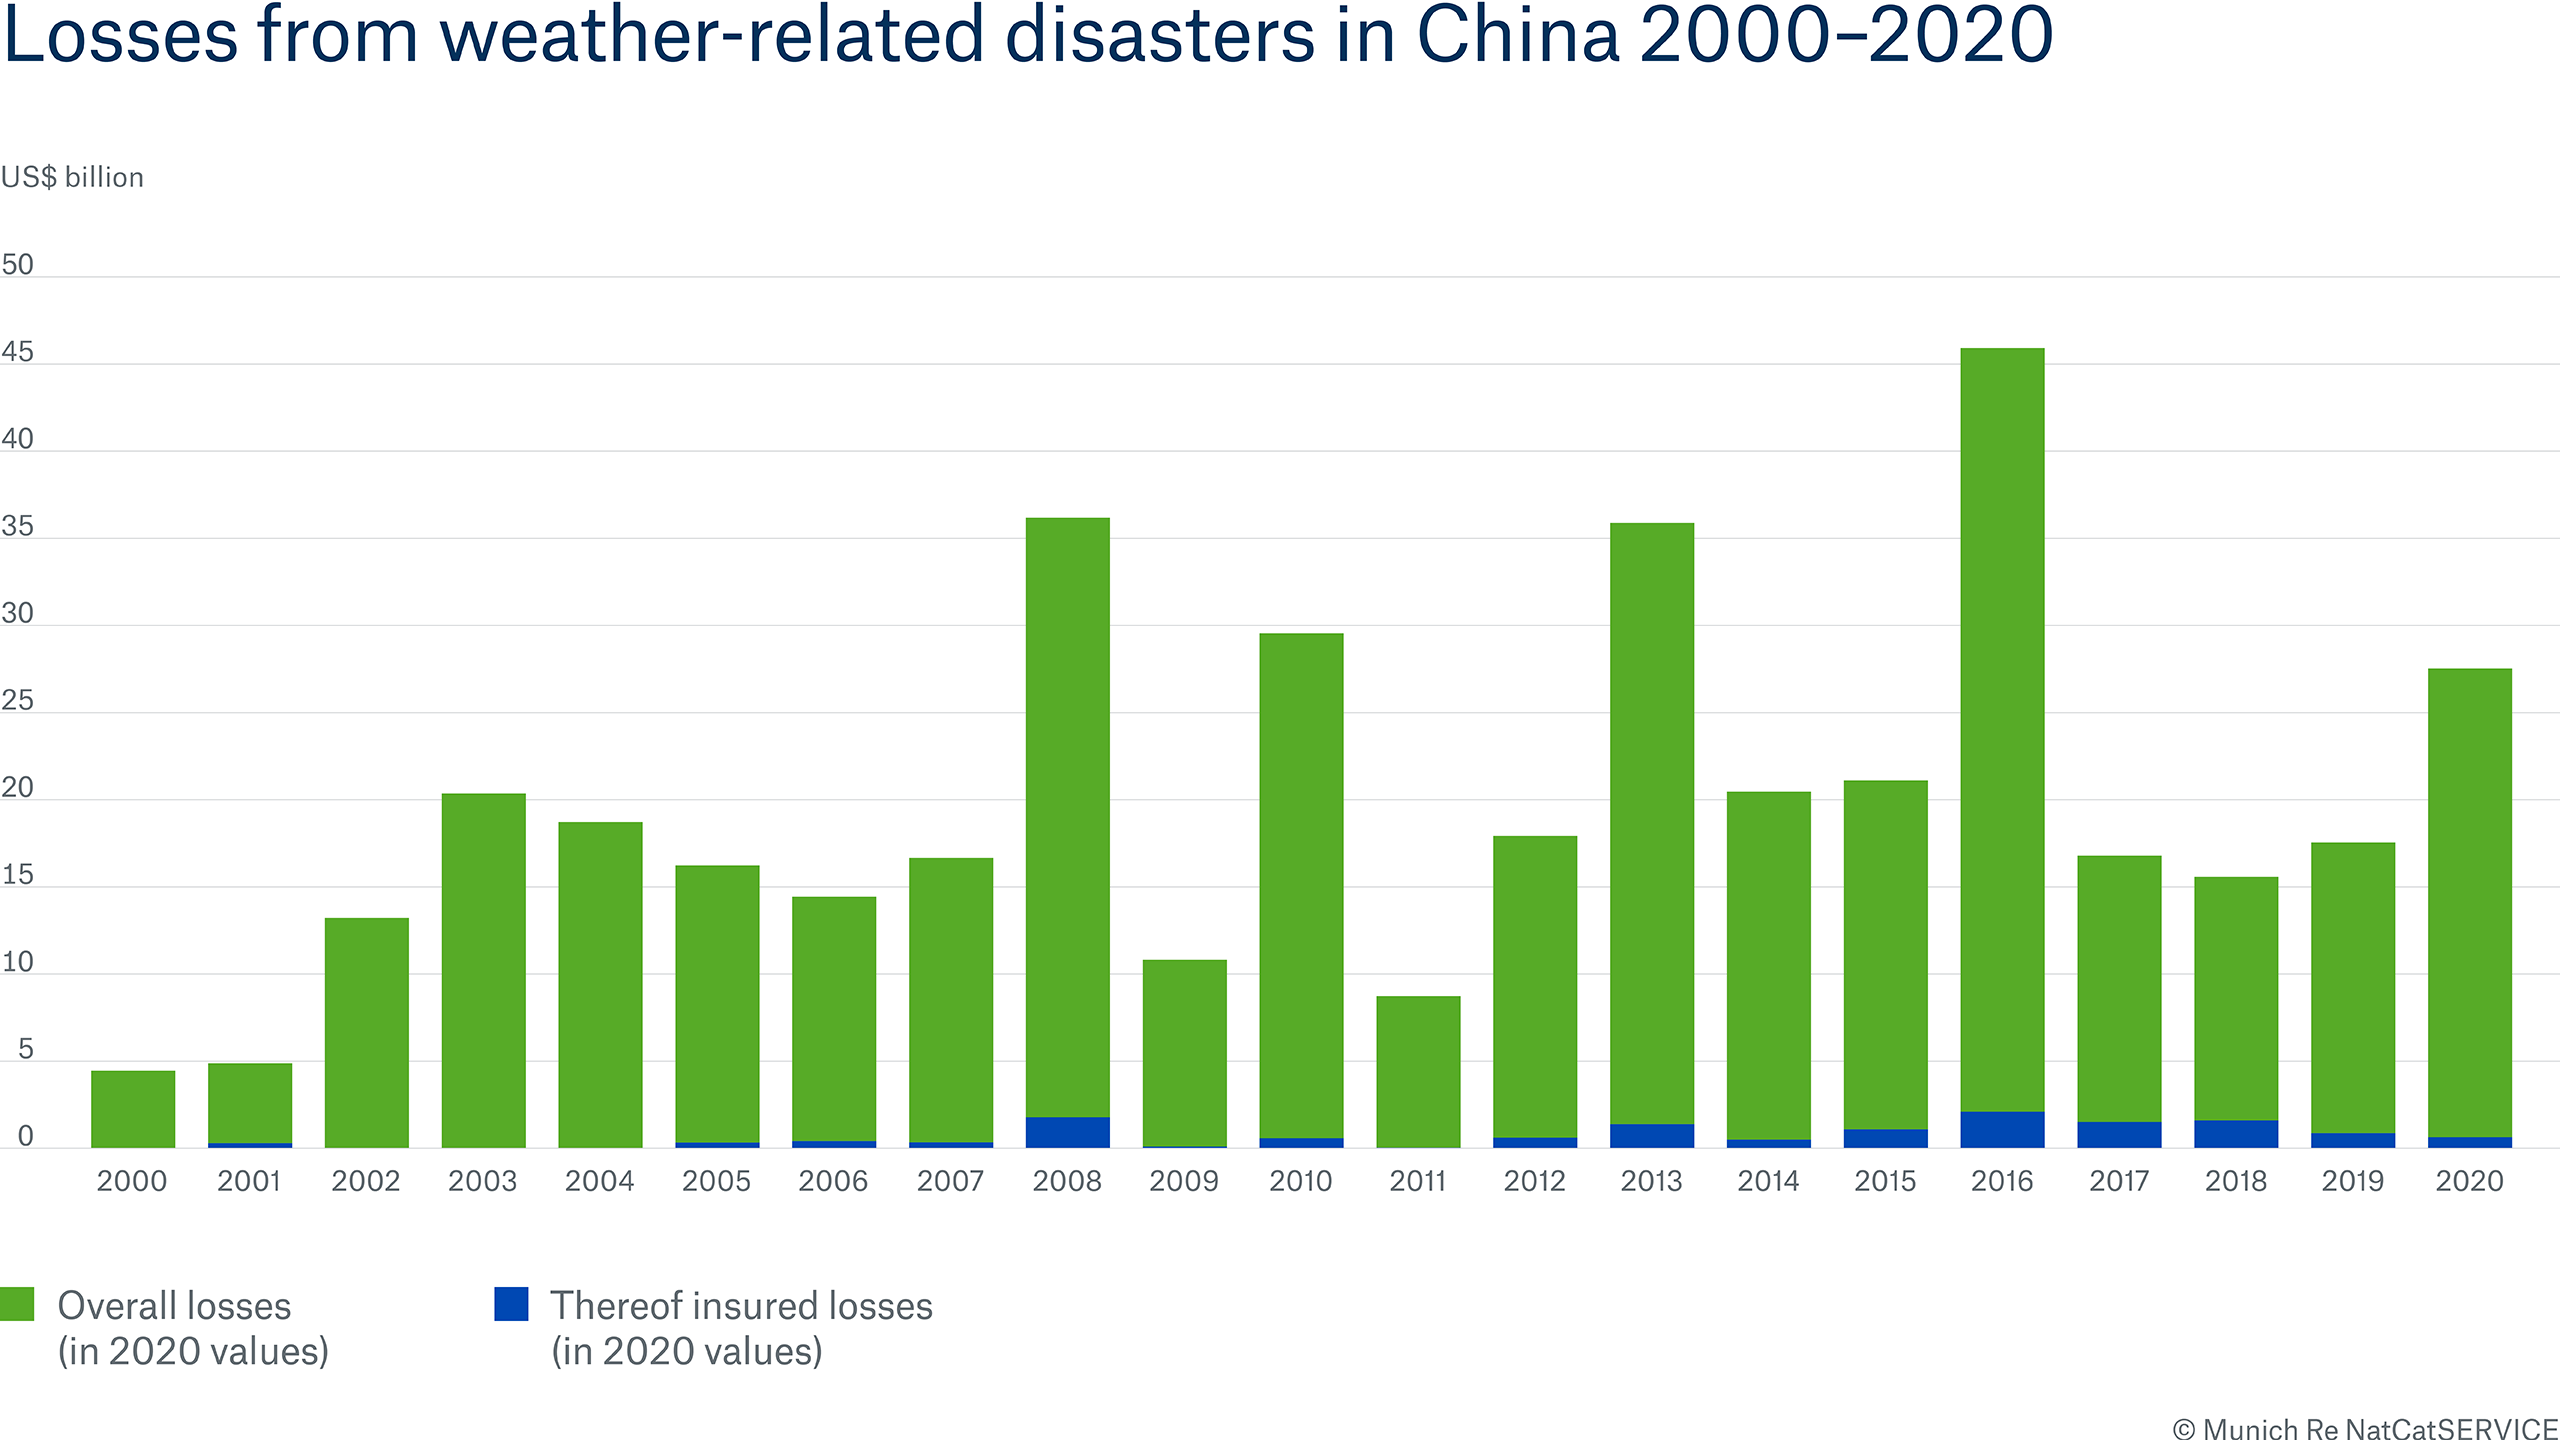 Losses from weather-related disasters in China